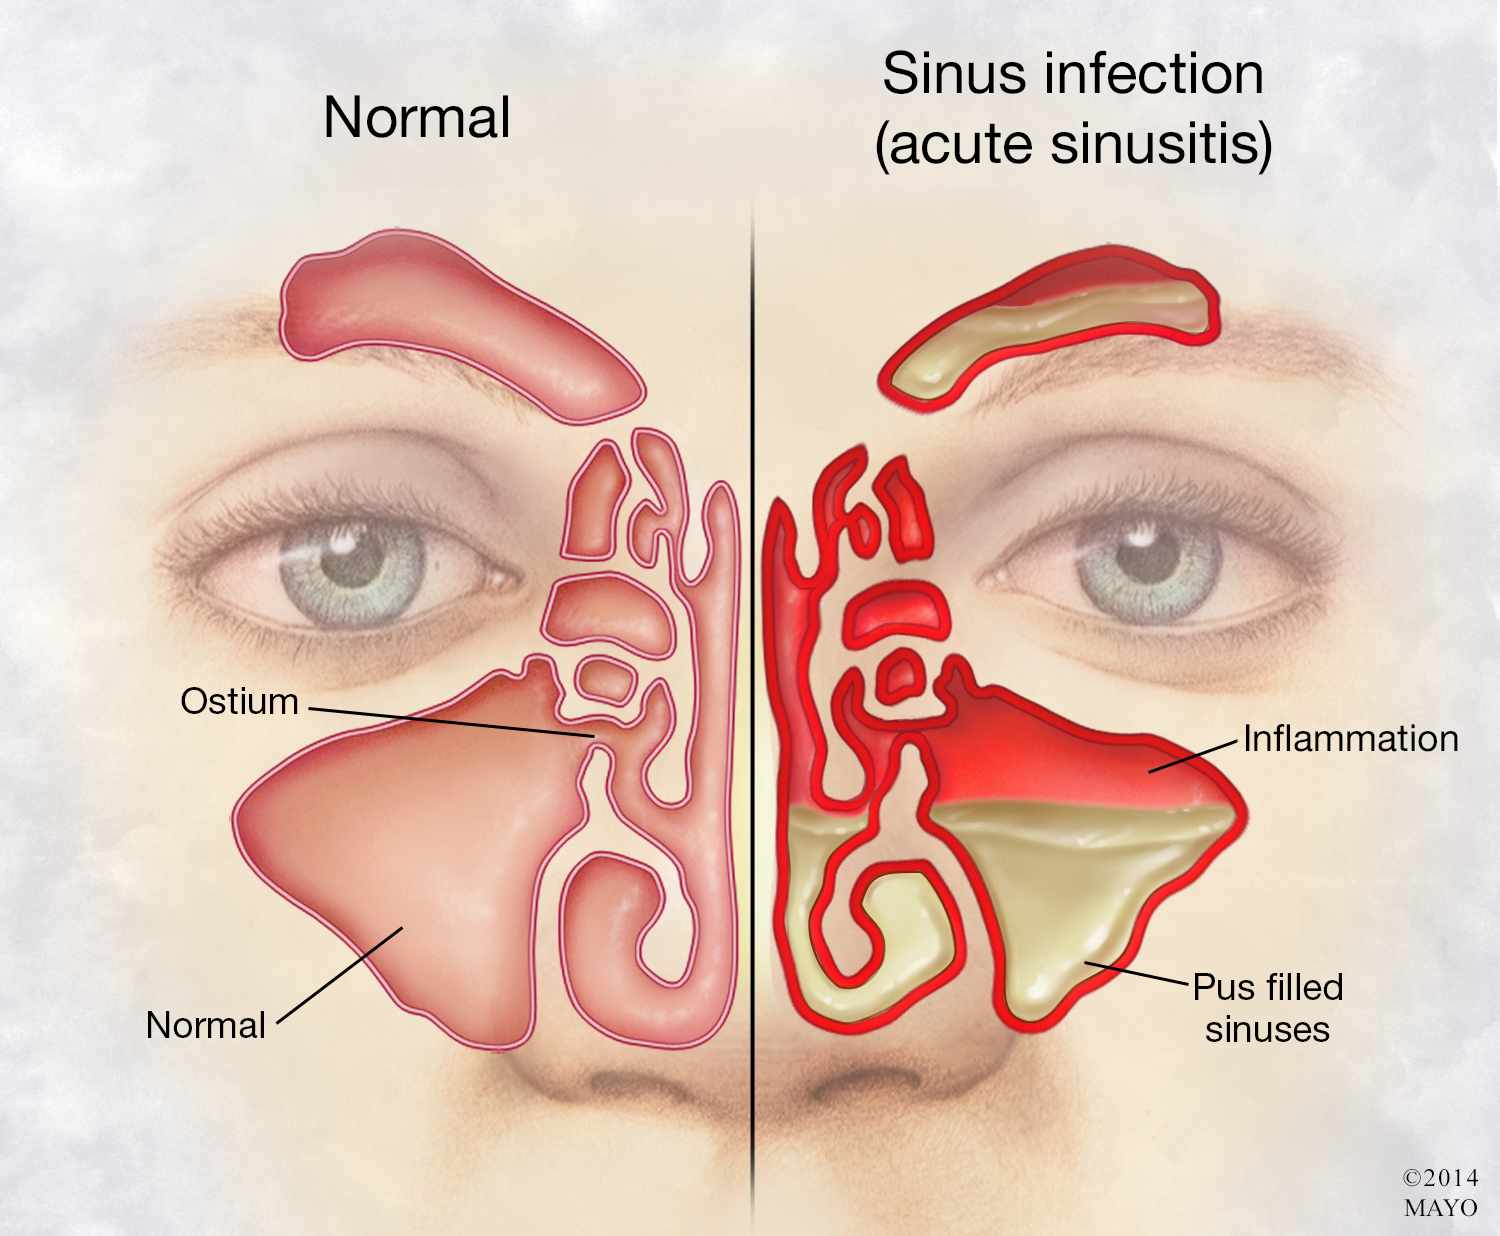 sinus canal infection